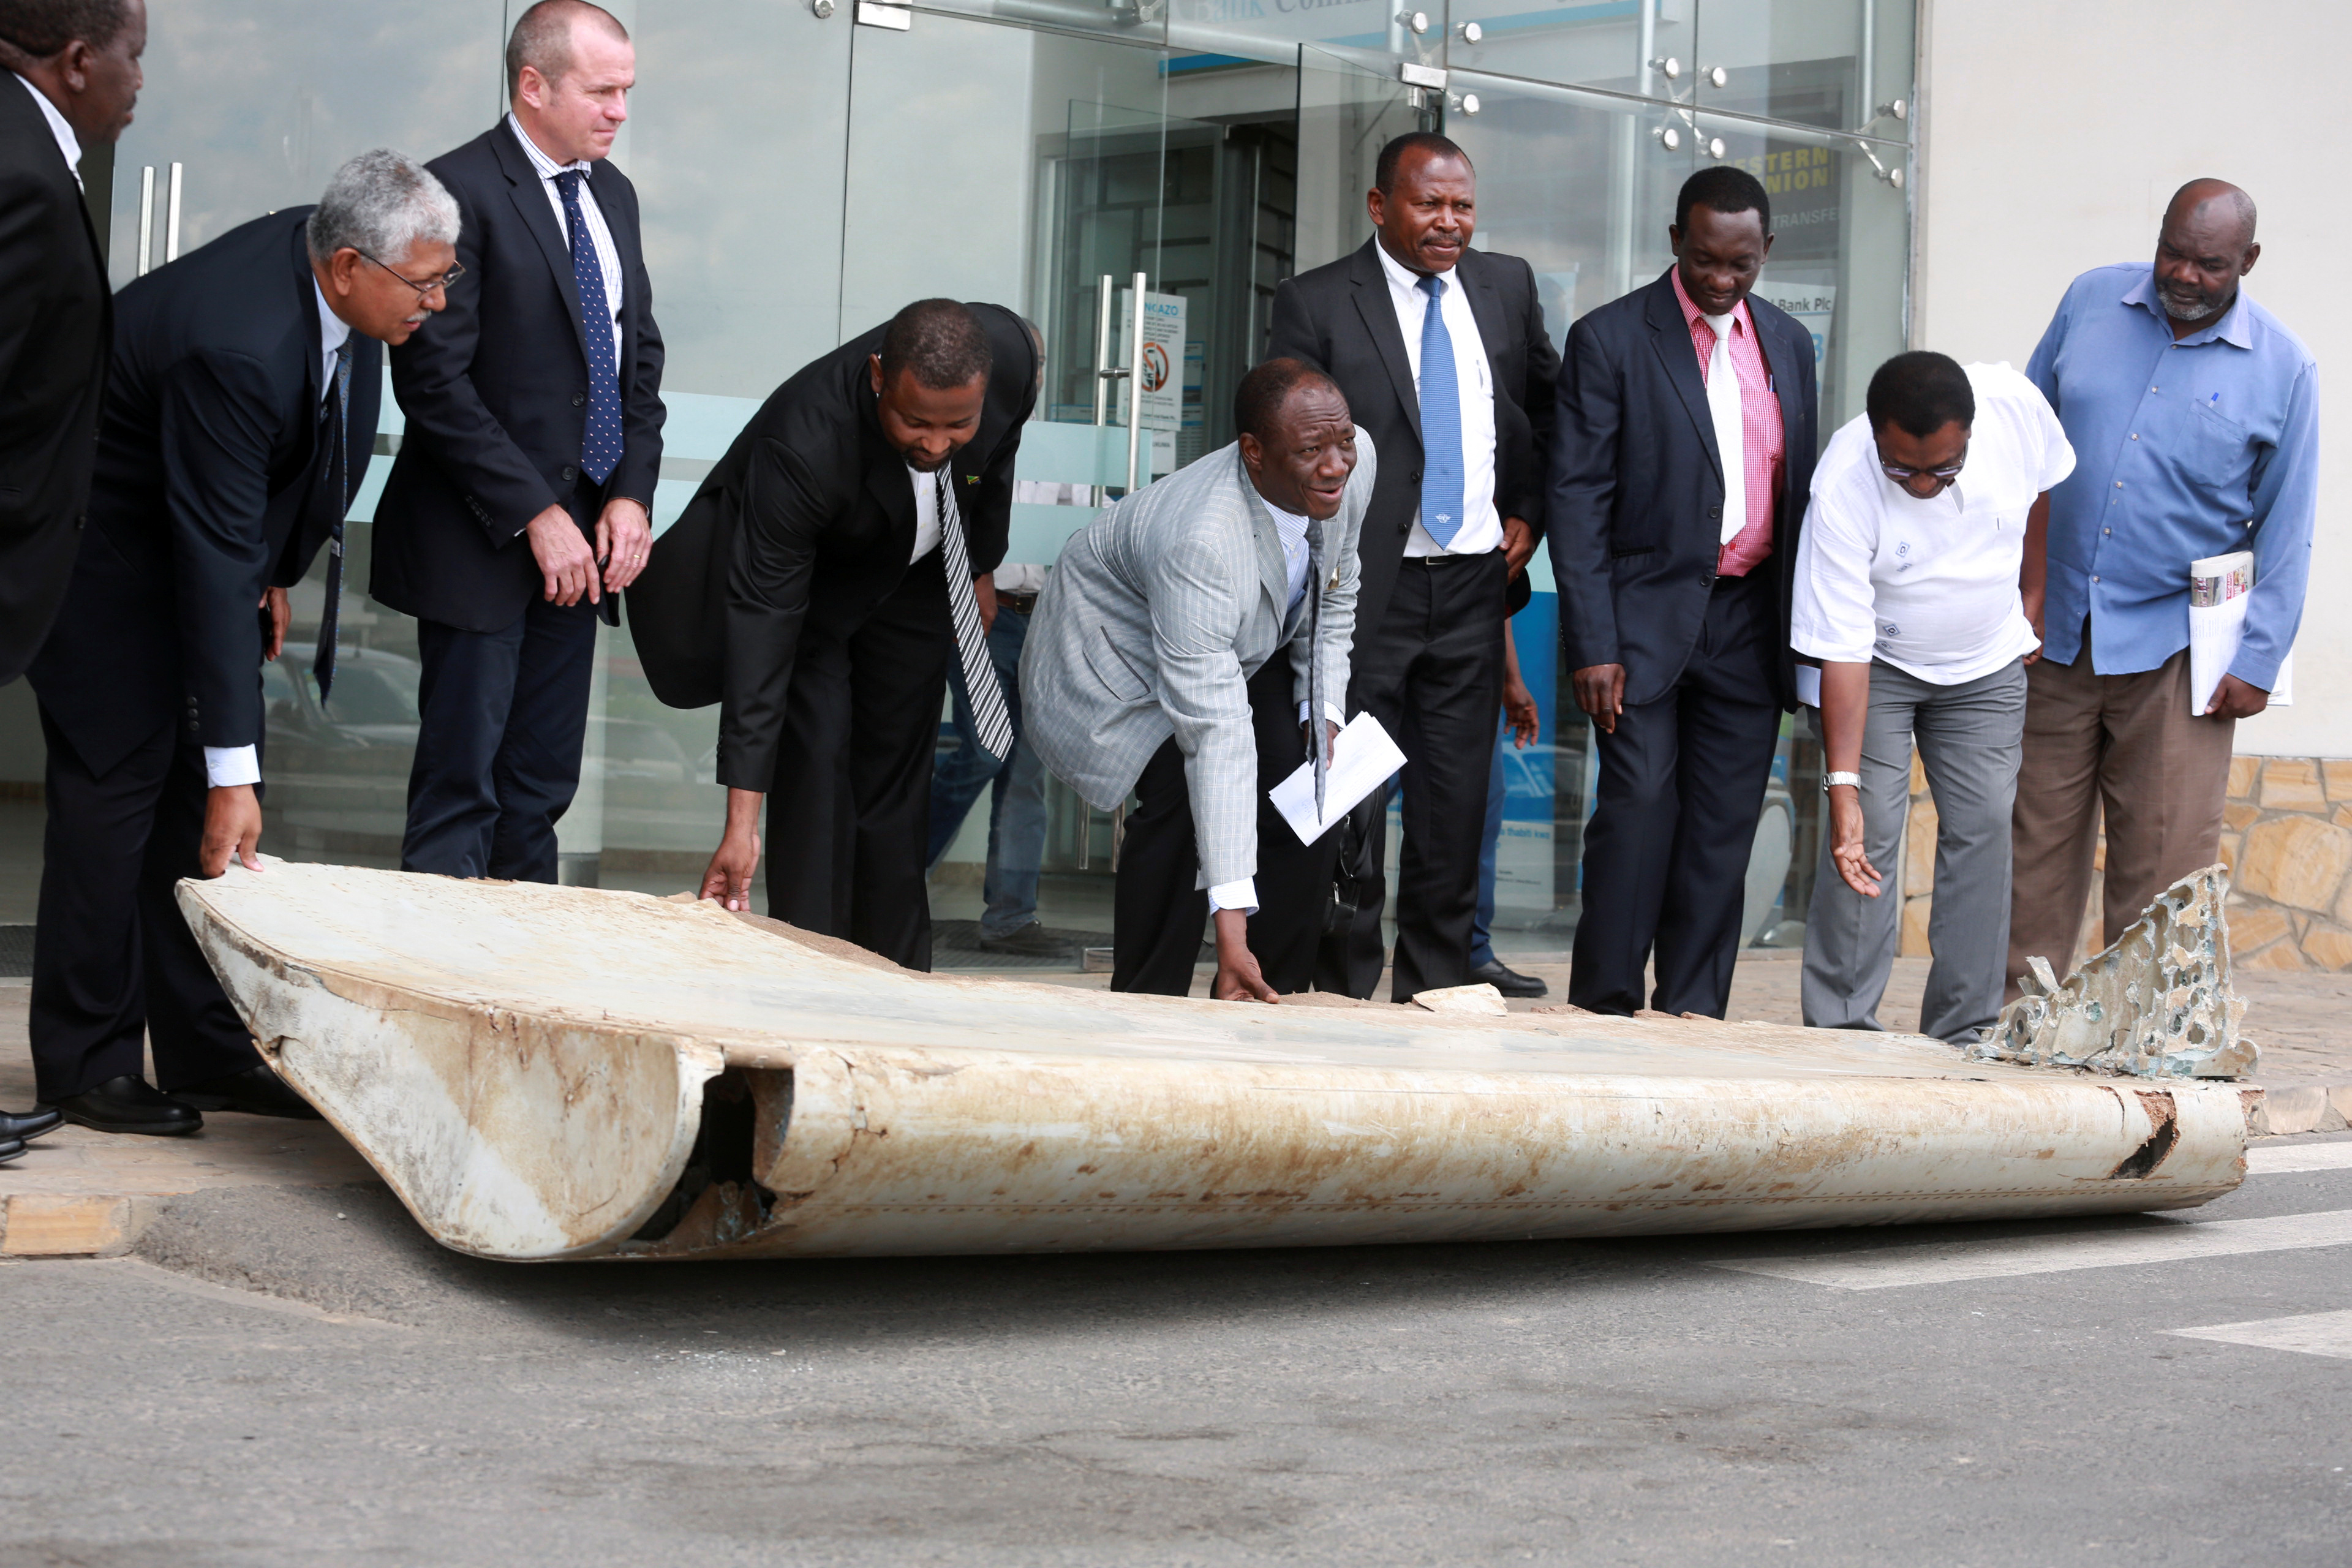 Tanzania Permanent Secretary to the ministry of Works, Transport and Communication Leonard Chamuriho hands over of a wing suspected to be a part of missing Malaysia Airlines jet MH370 discovered on the island of Pemba, in Dar es Salaam